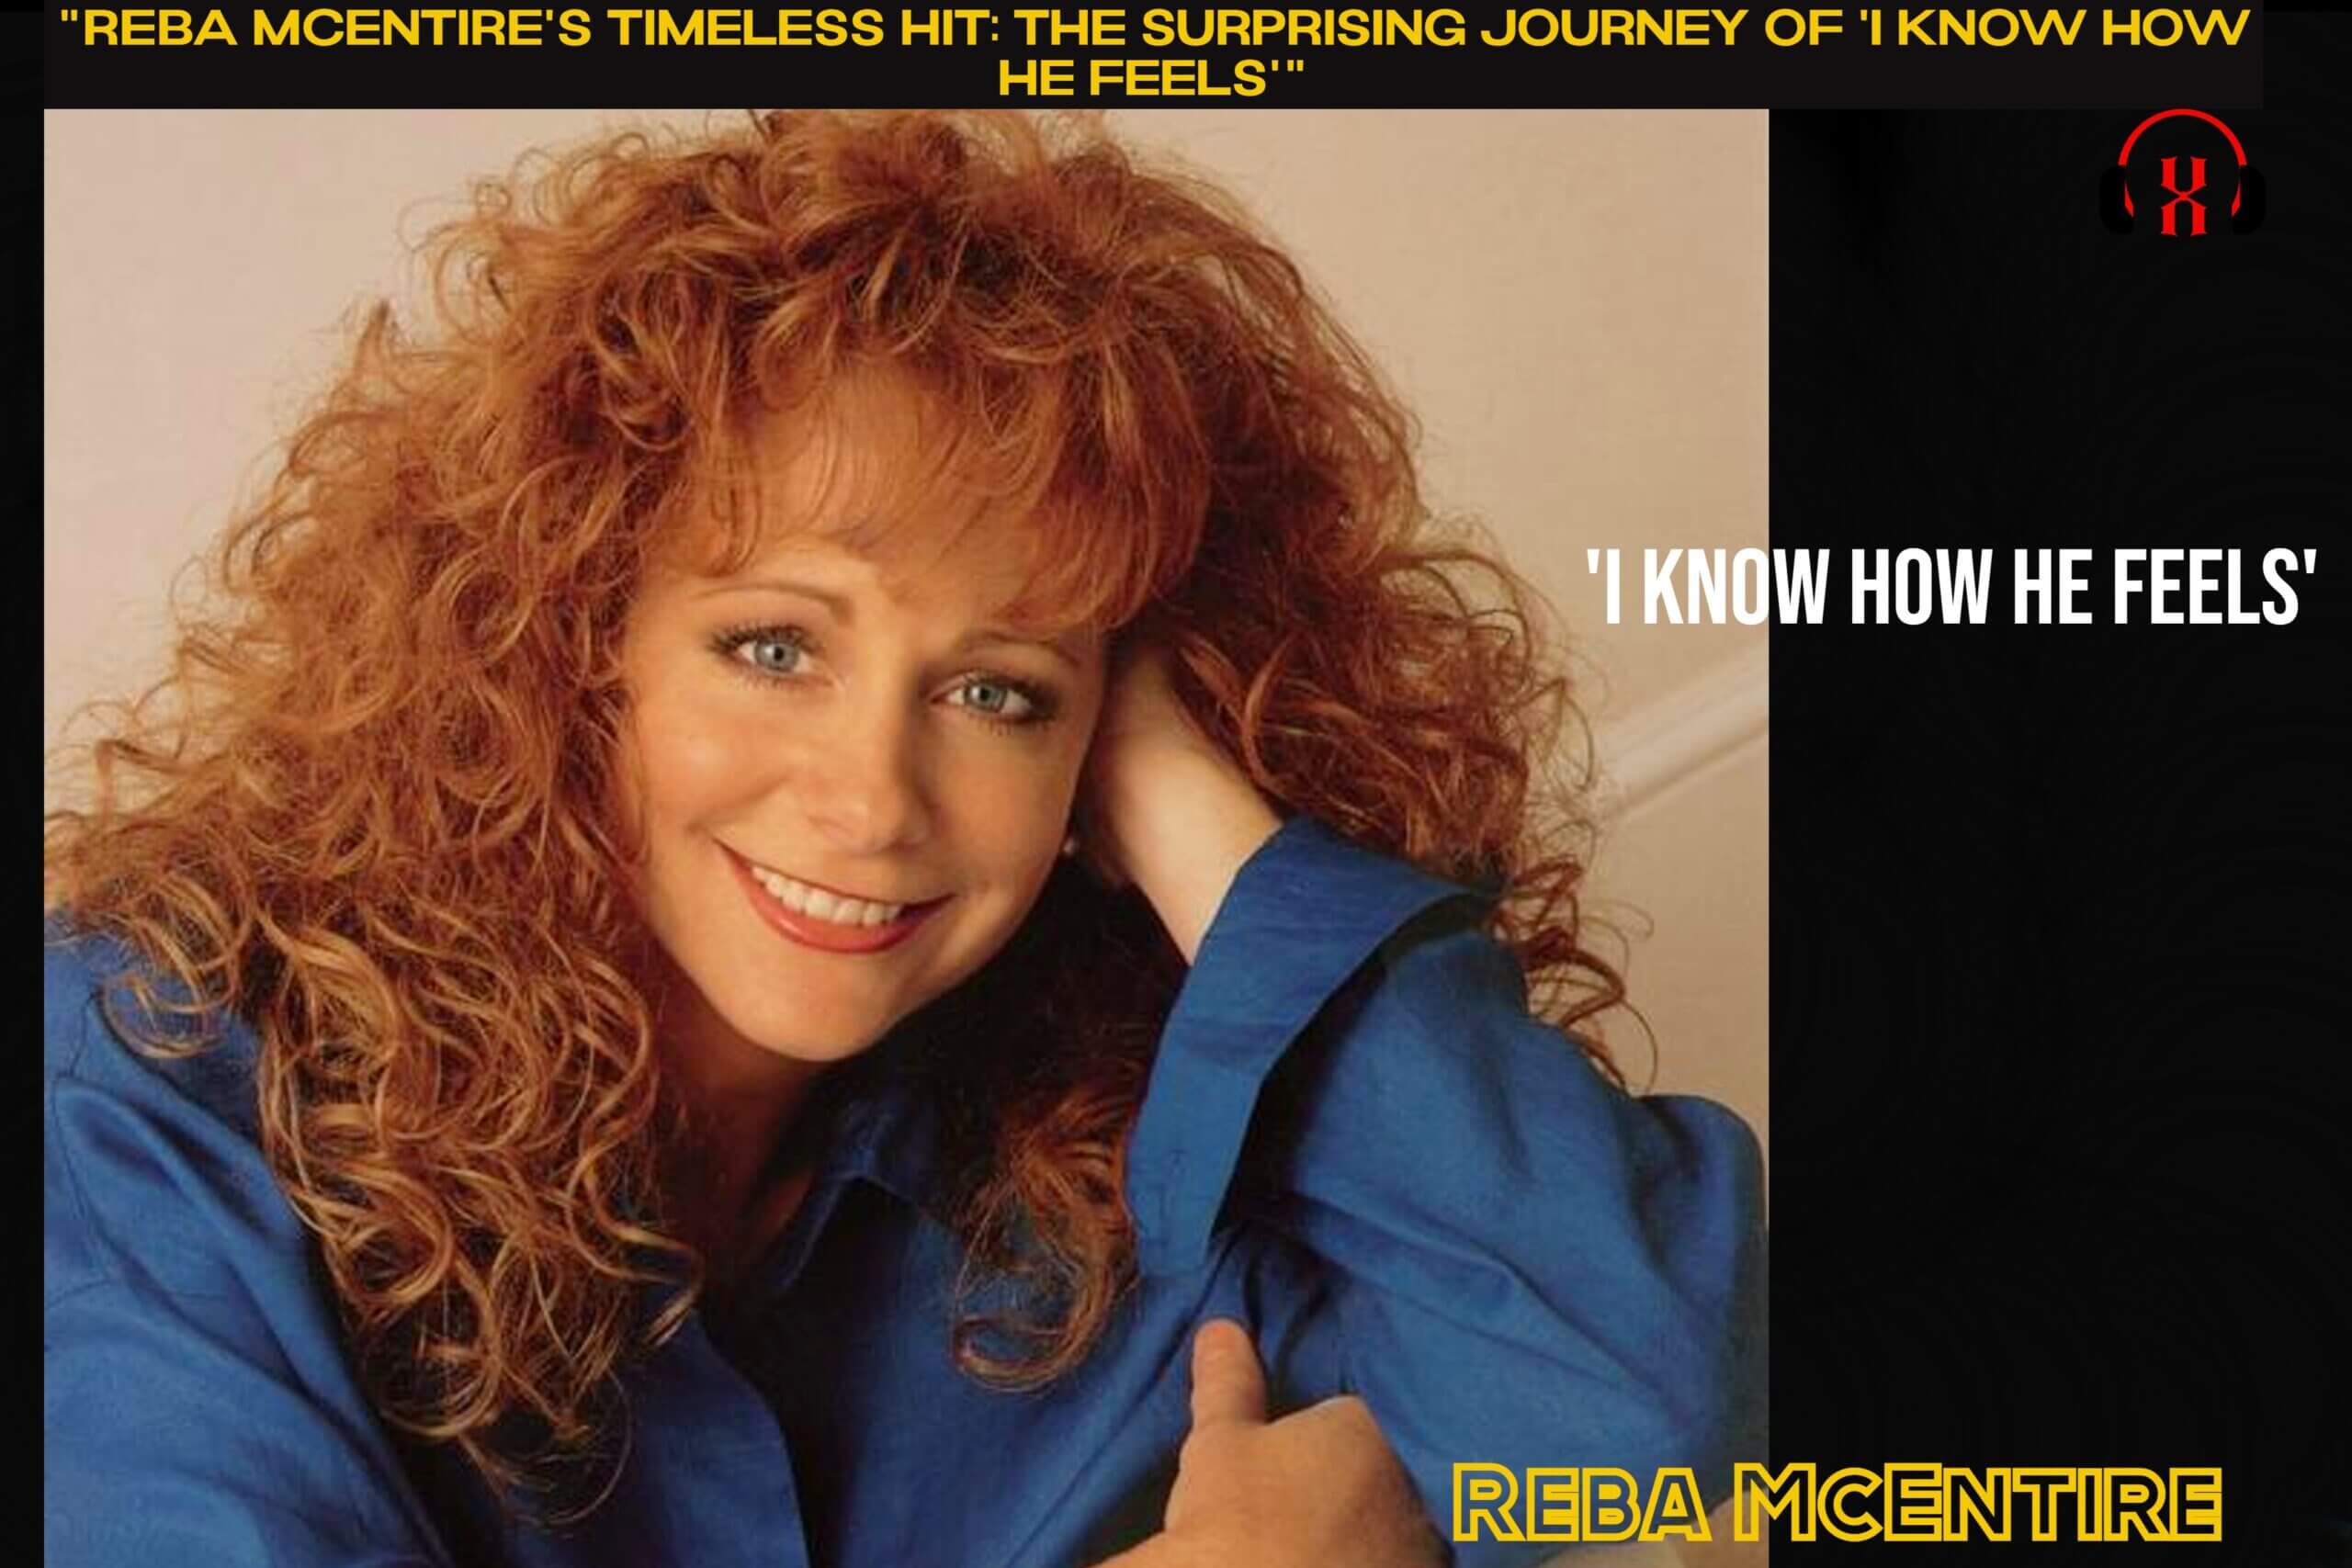 "Reba McEntire's Timeless Hit: The Surprising Journey of 'I Know How He Feels'"